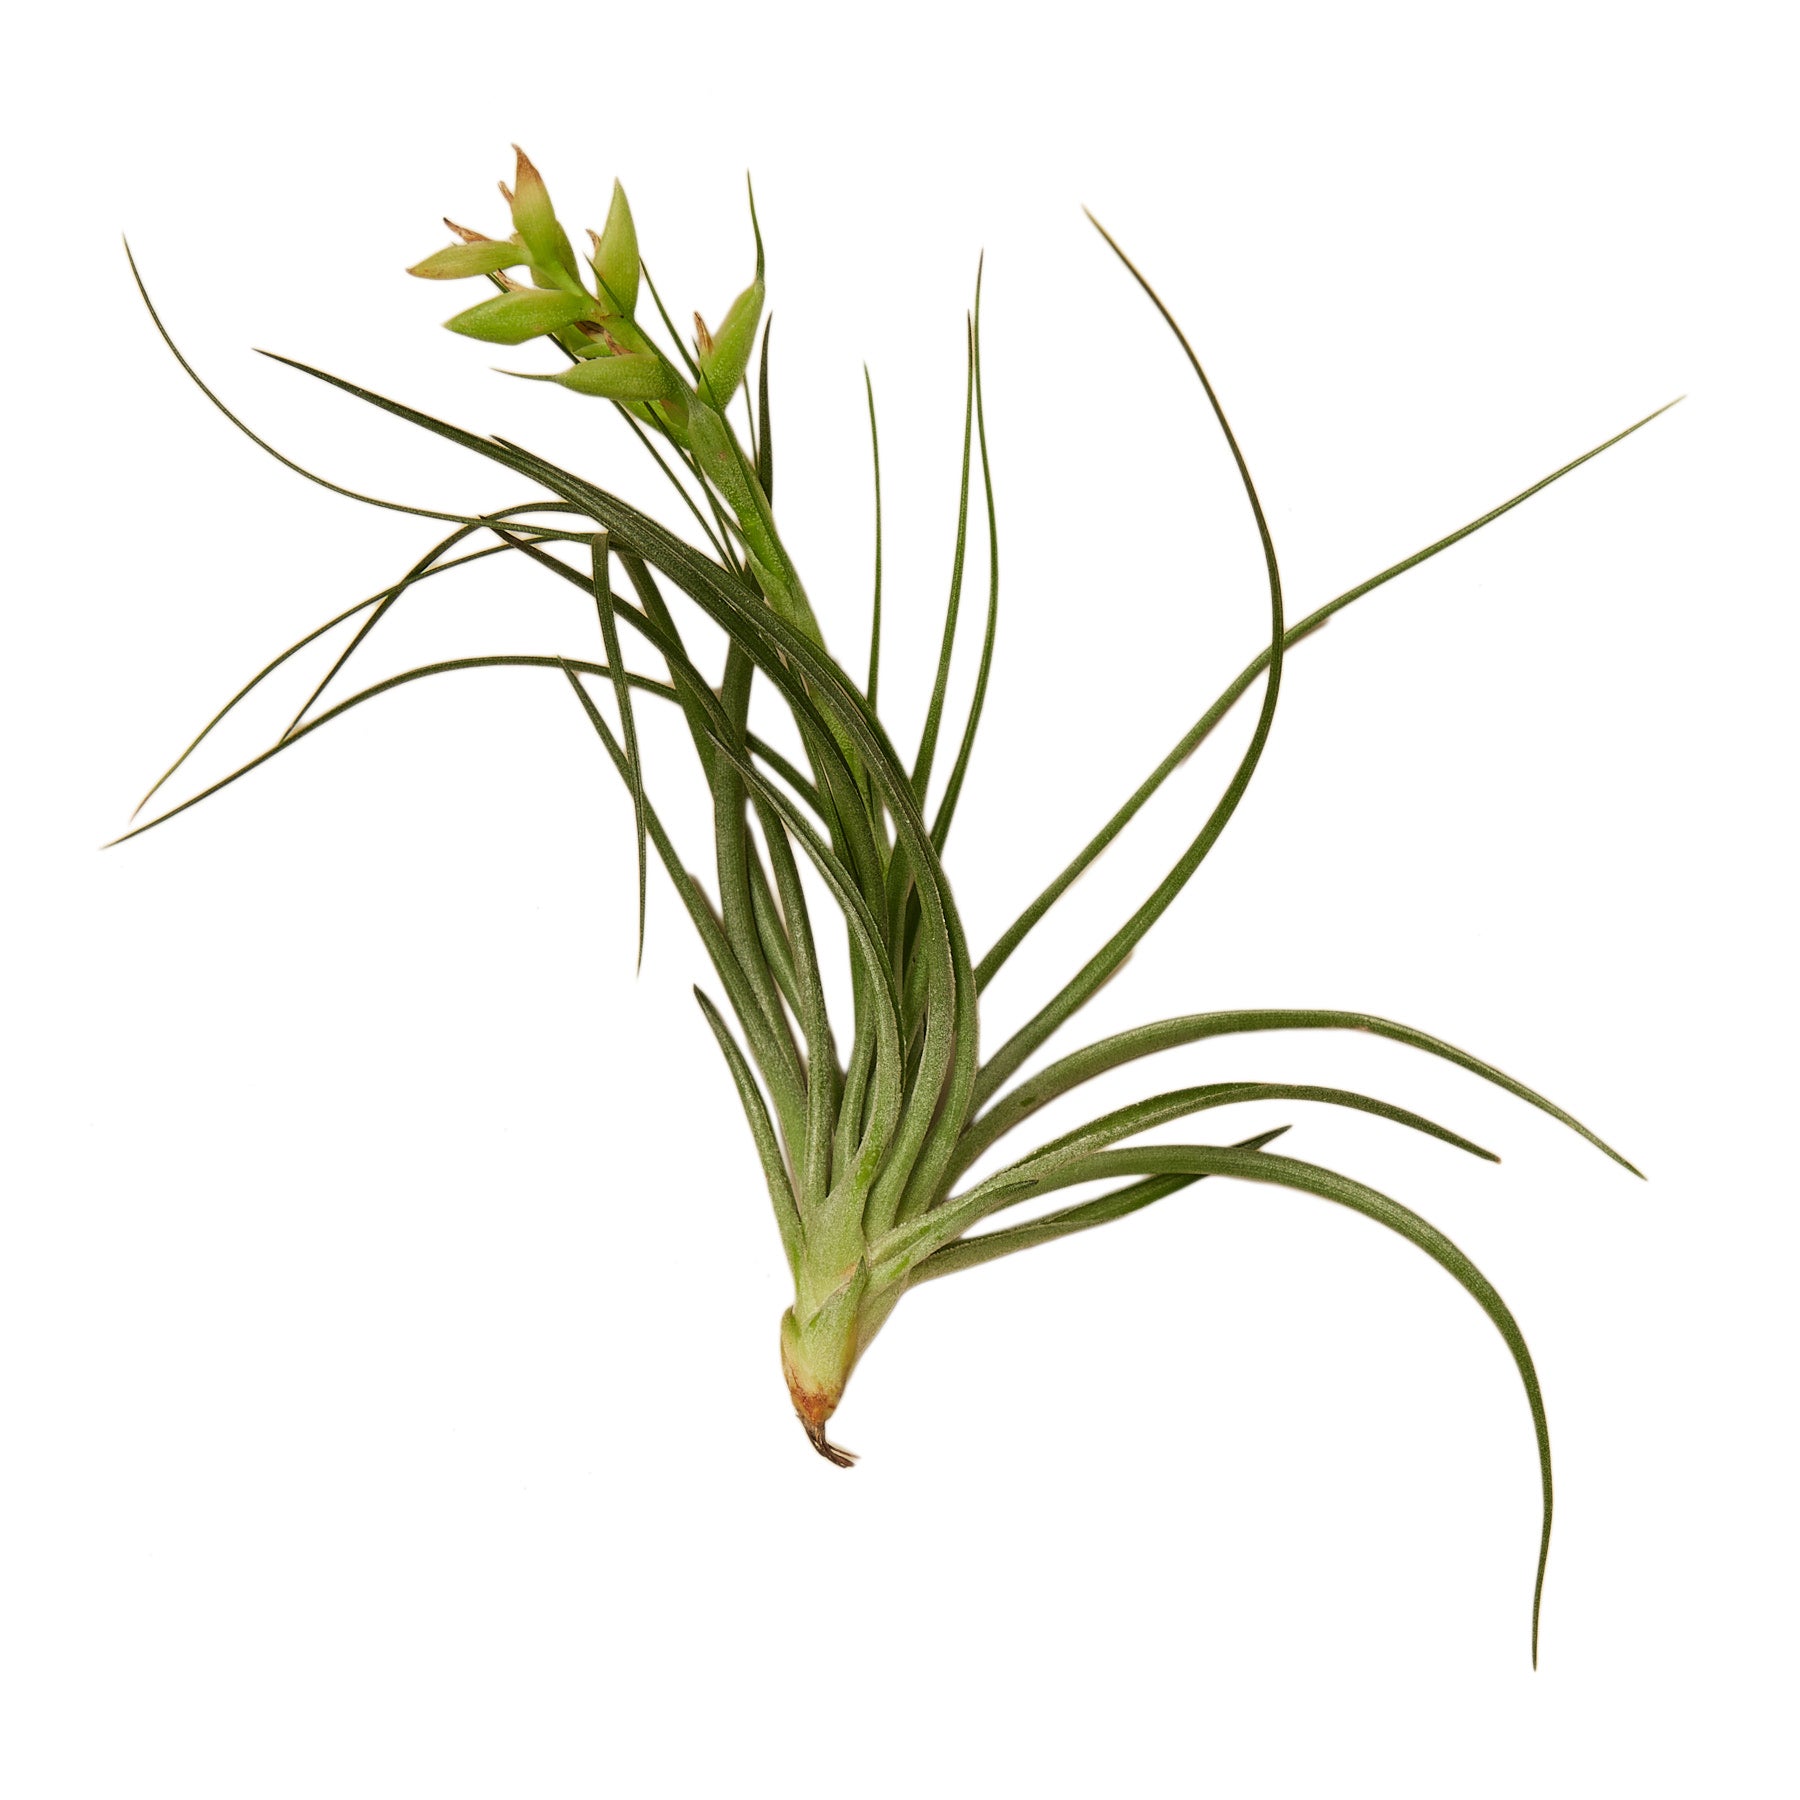 A small air plant on a white background from the best garden center near me.